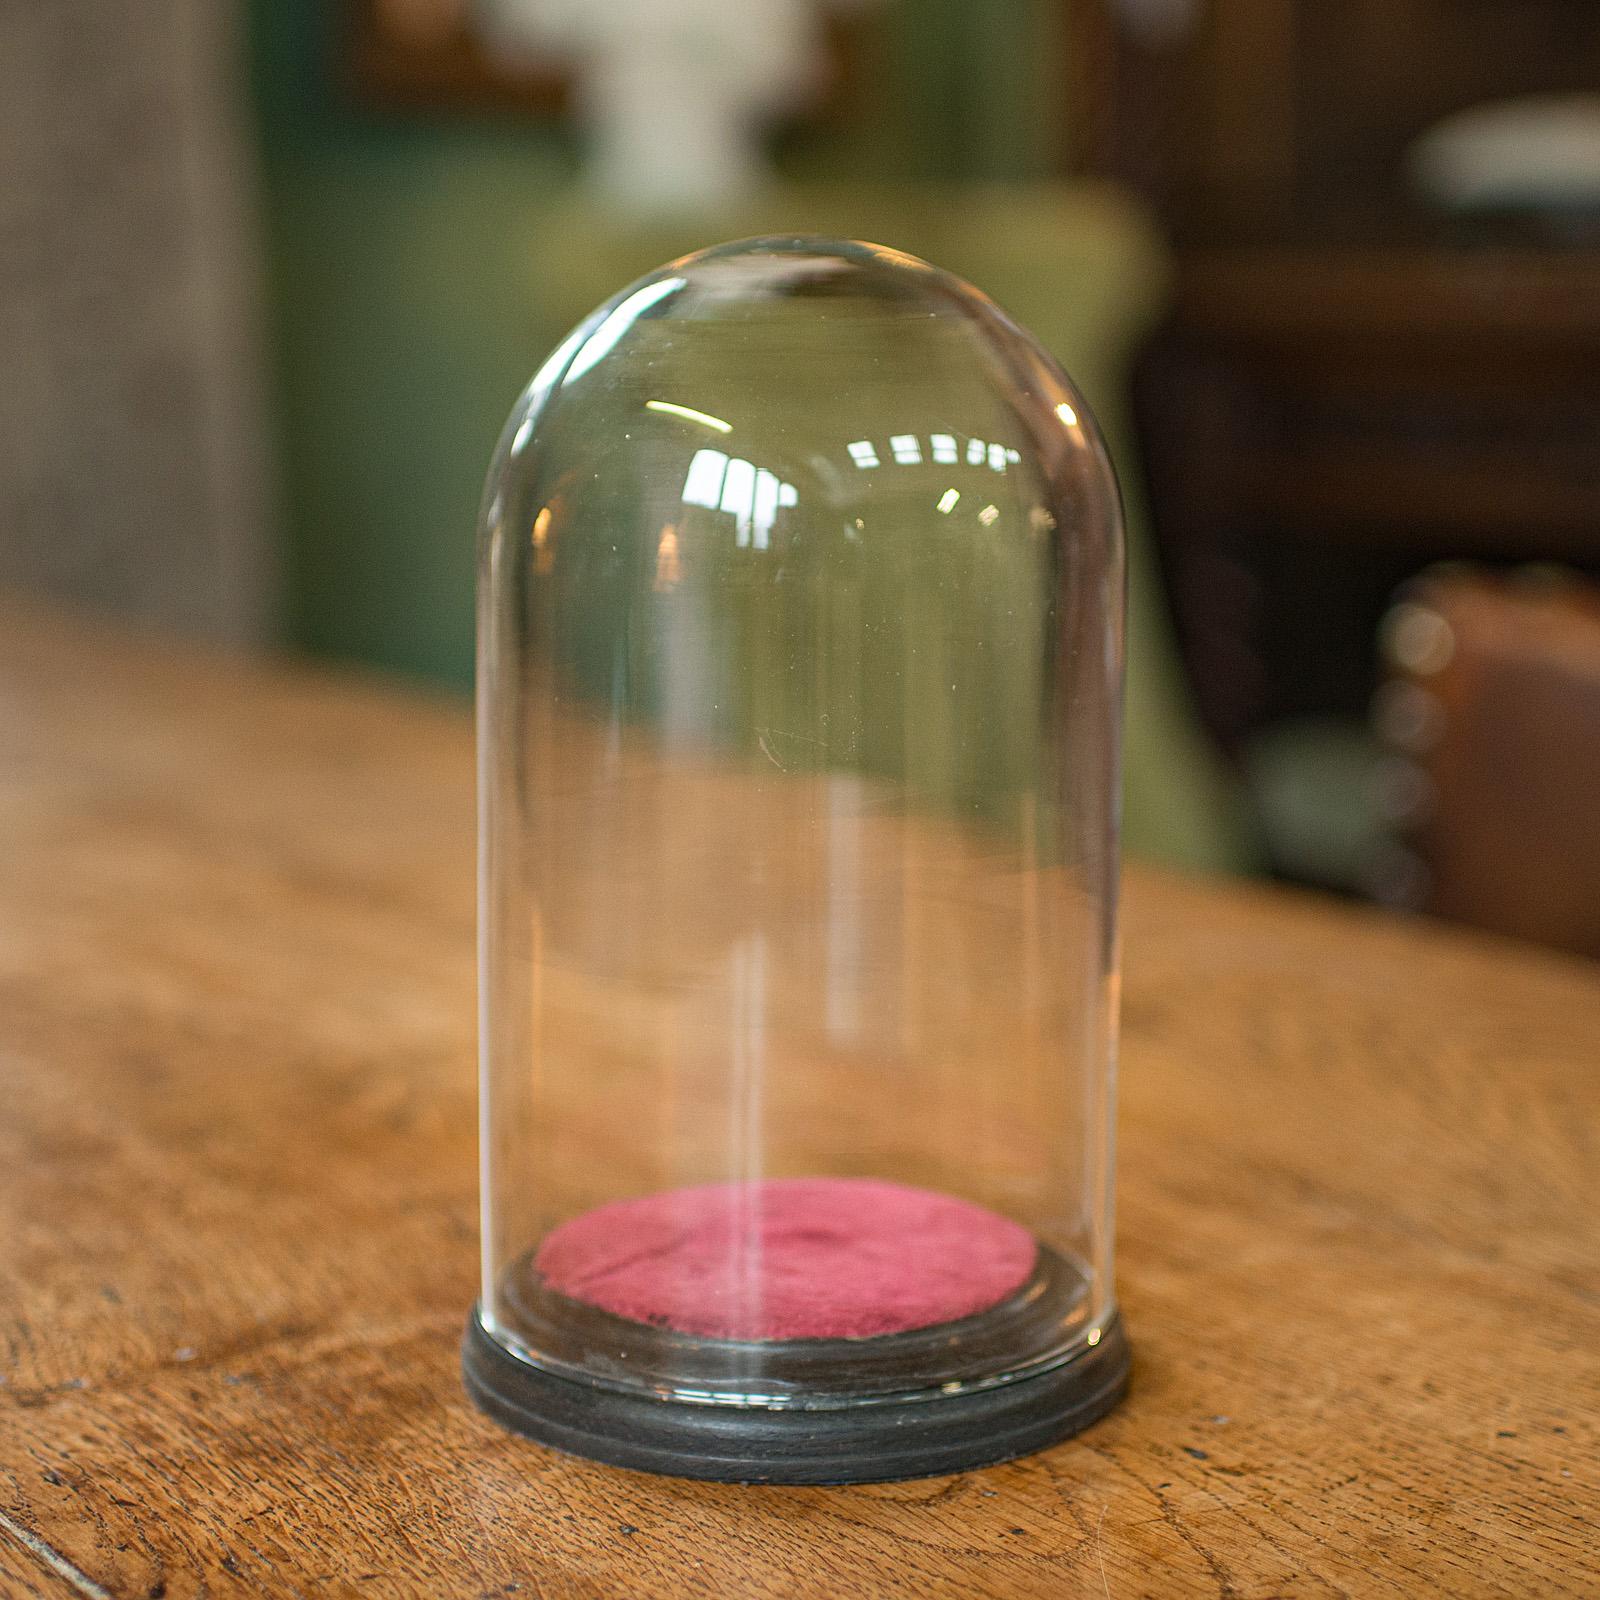 This is a small antique display dome. An English, glass taxidermy specimen or decorative collectible showcase, dating to the late Victorian period, circa 1890.

Pleasingly petite, with a bright appearance to showcase smaller items
Displaying a